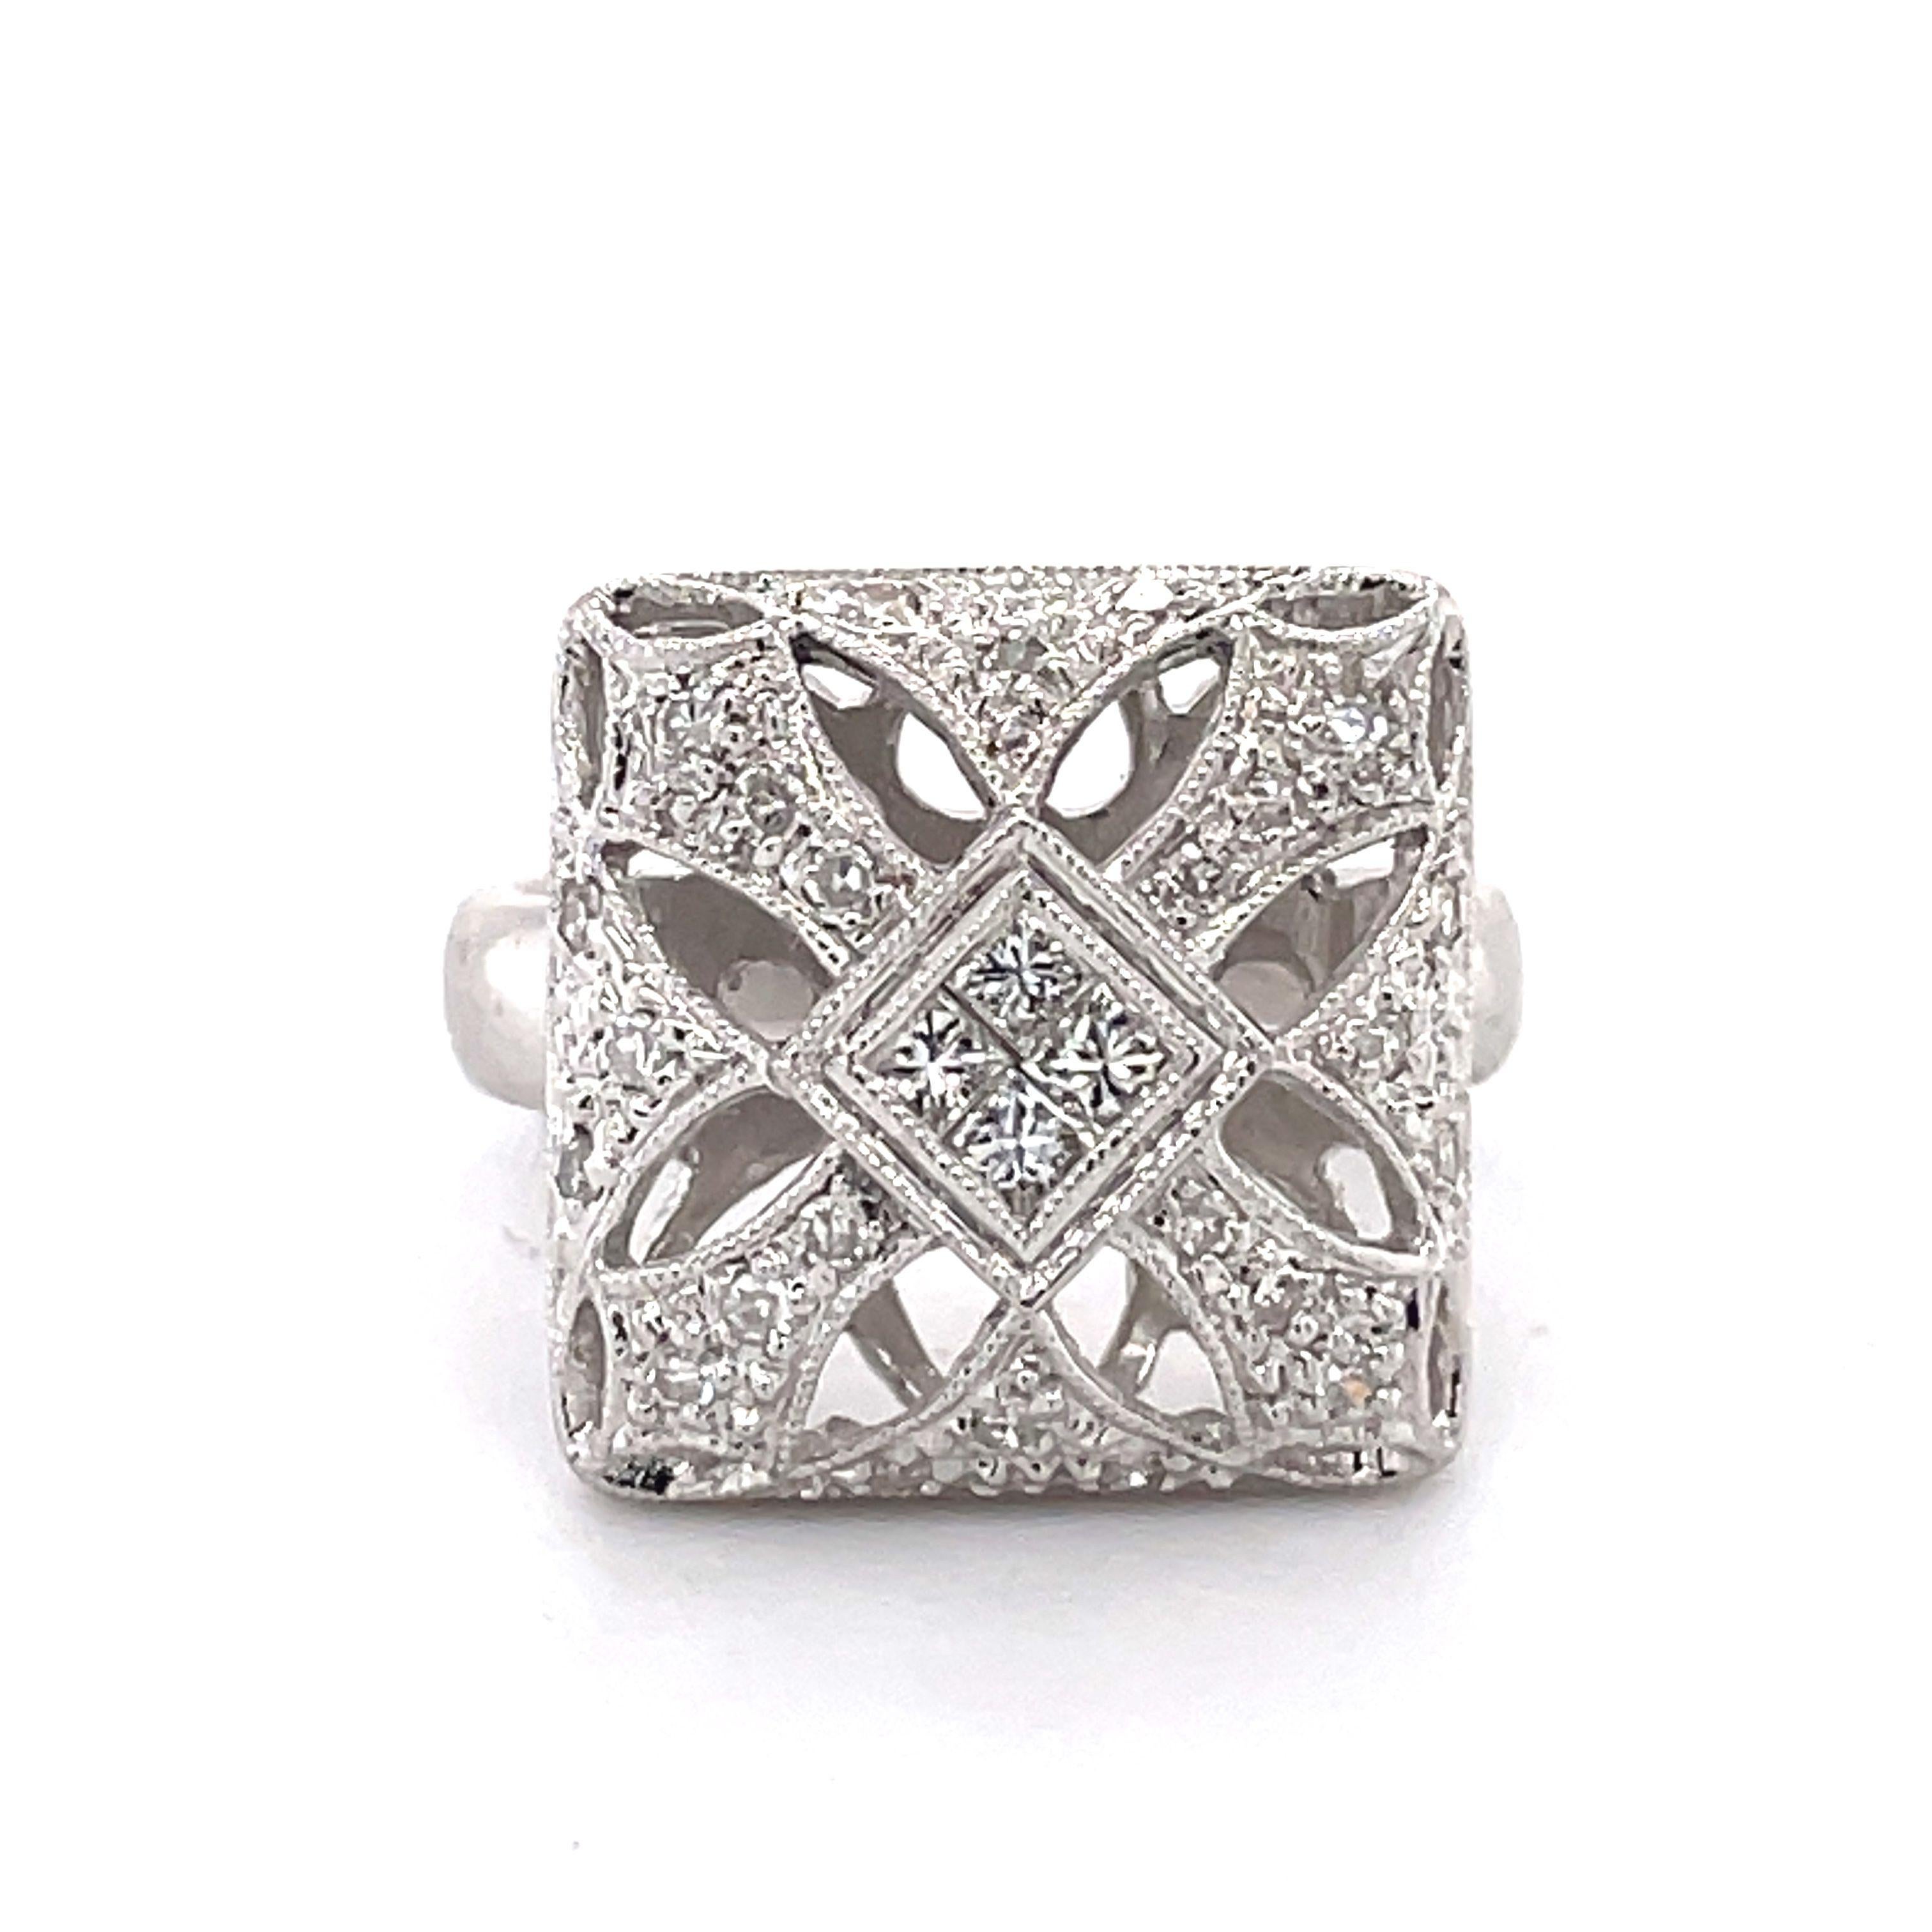 Princess Cut Art Deco Mosaic Style Cocktail Ring - 14K White Gold, 0.78ct Netural Diaonds For Sale